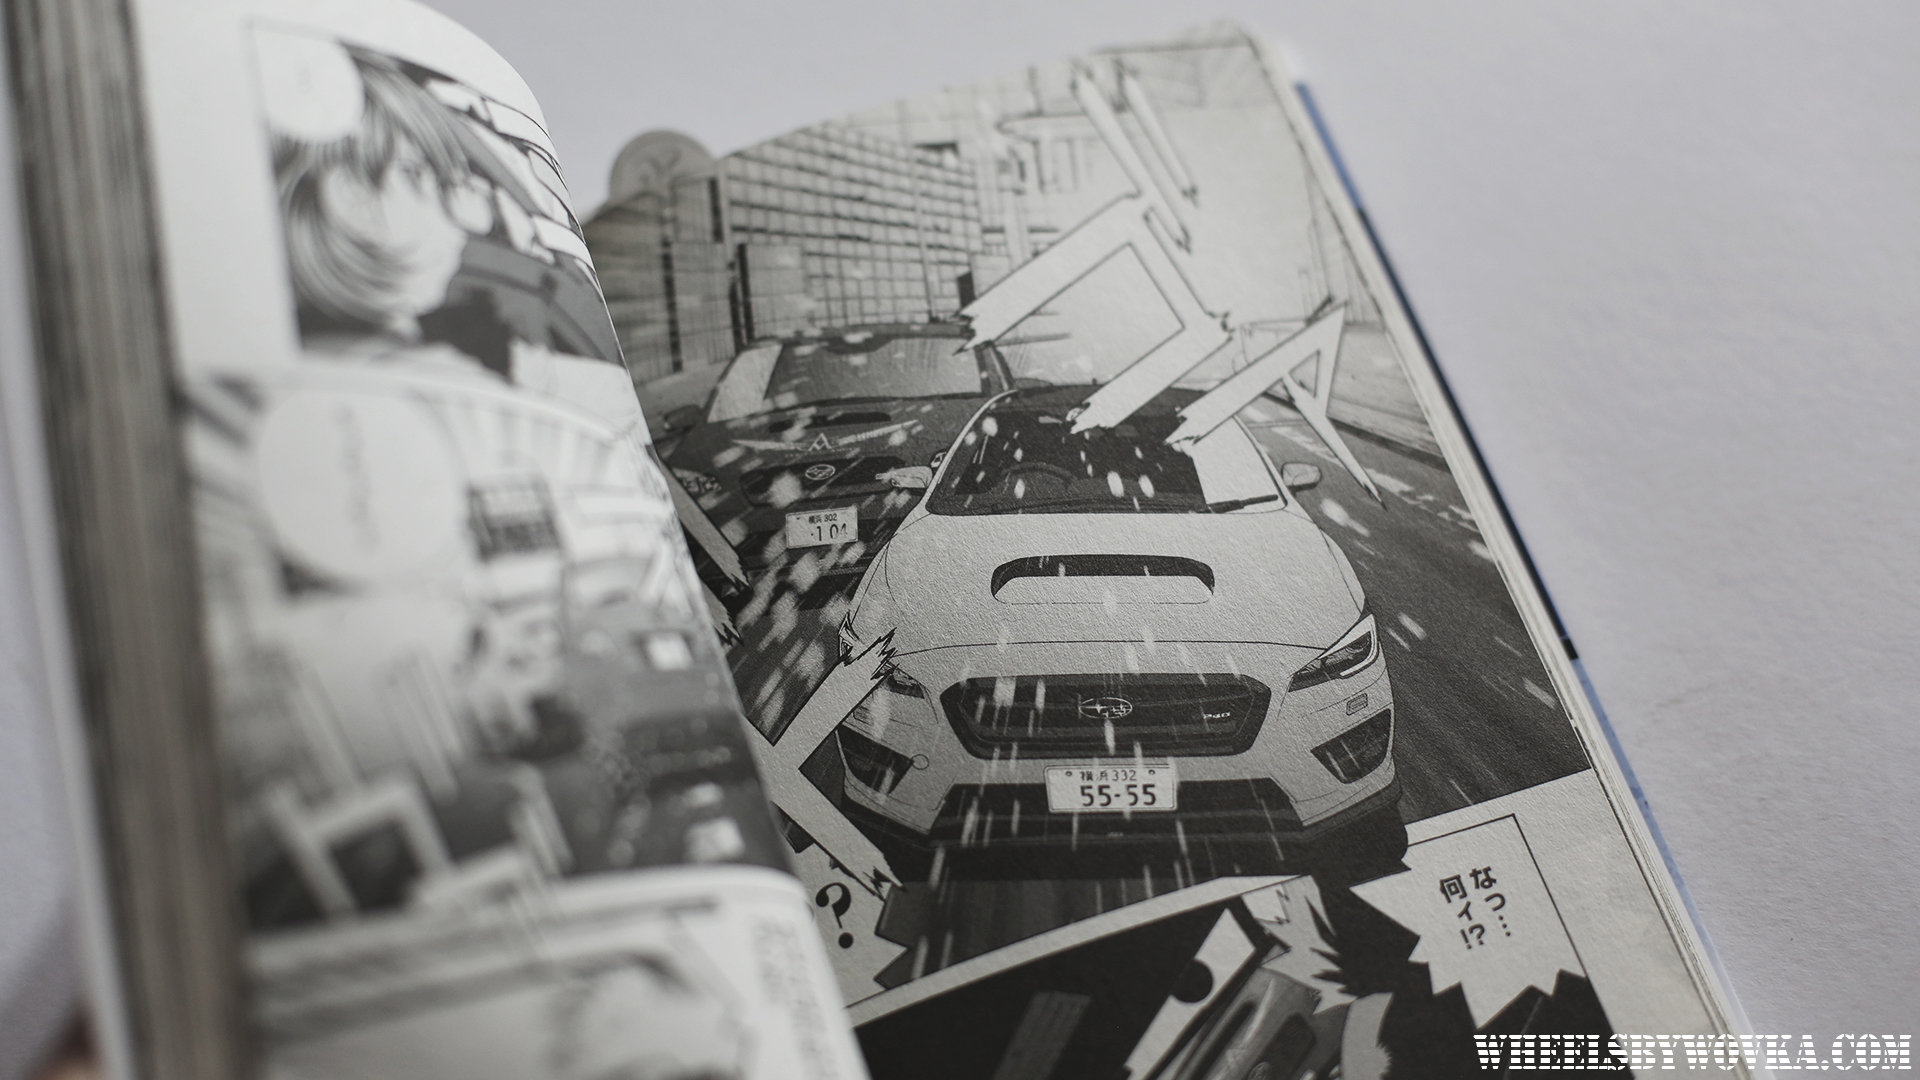 18 Manga about car culture that are not Initial D - WHEELSBYWOVKA